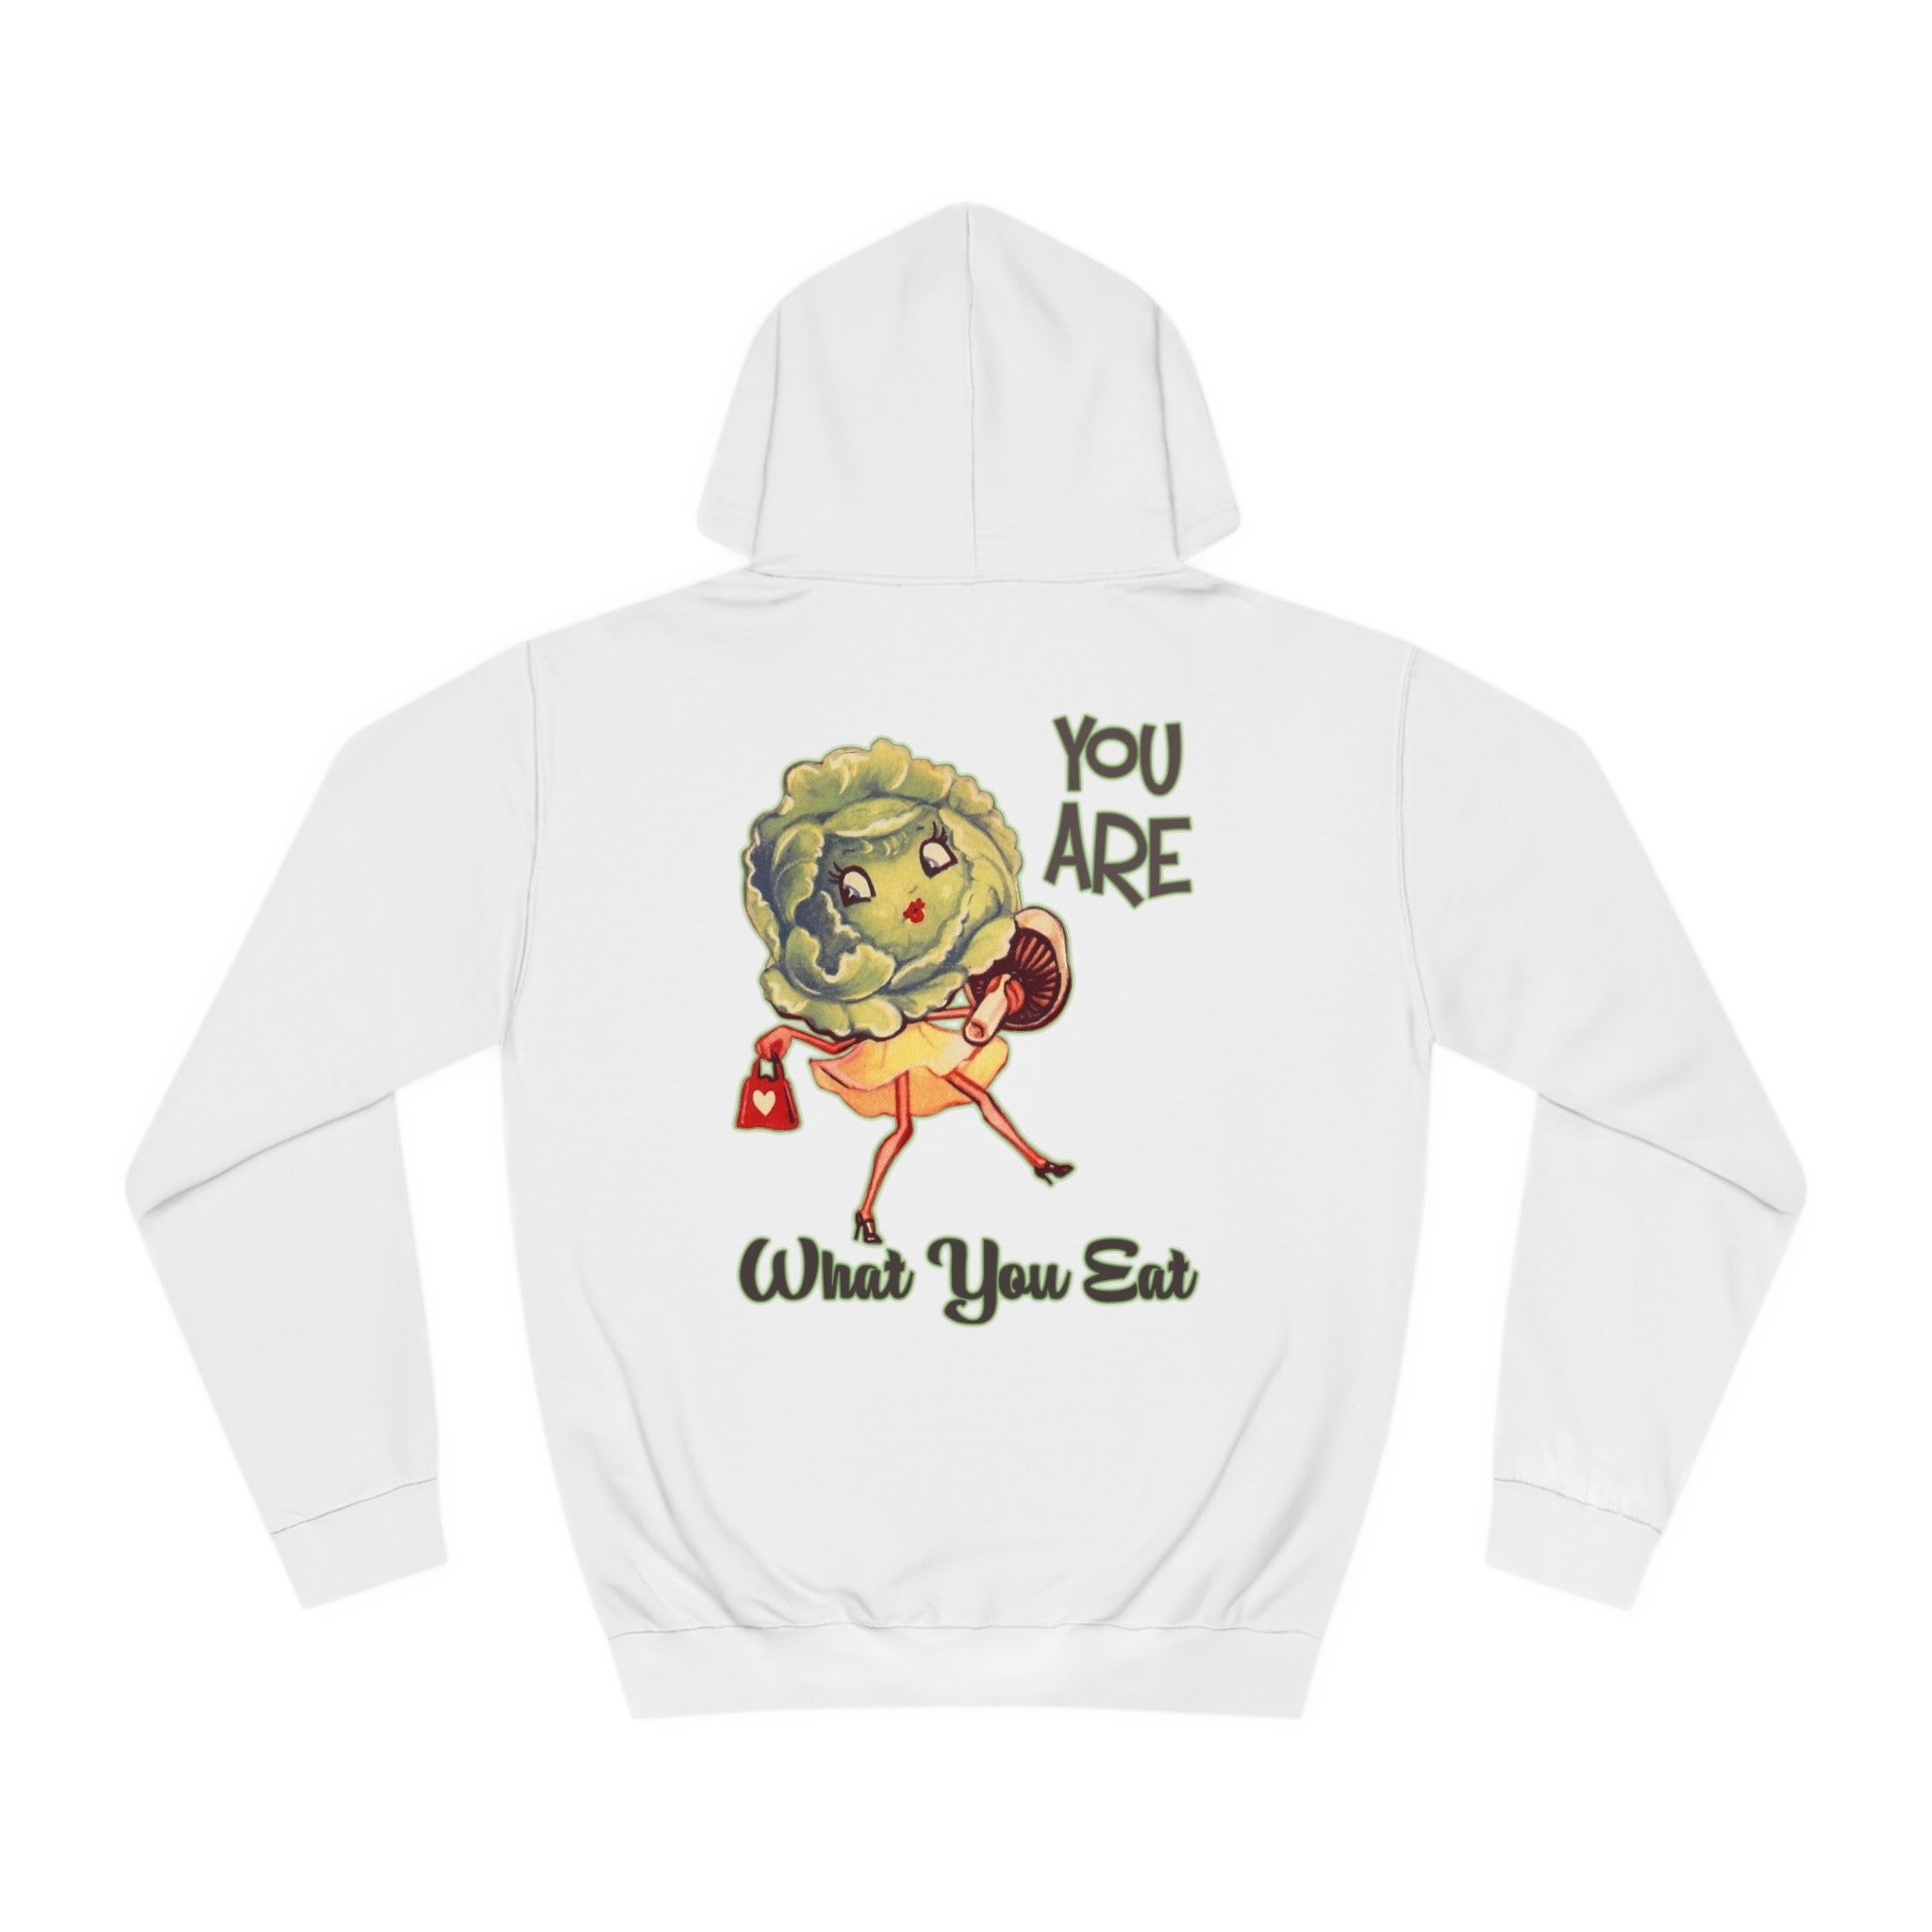 You Are What You Eat Unisex Hoodie